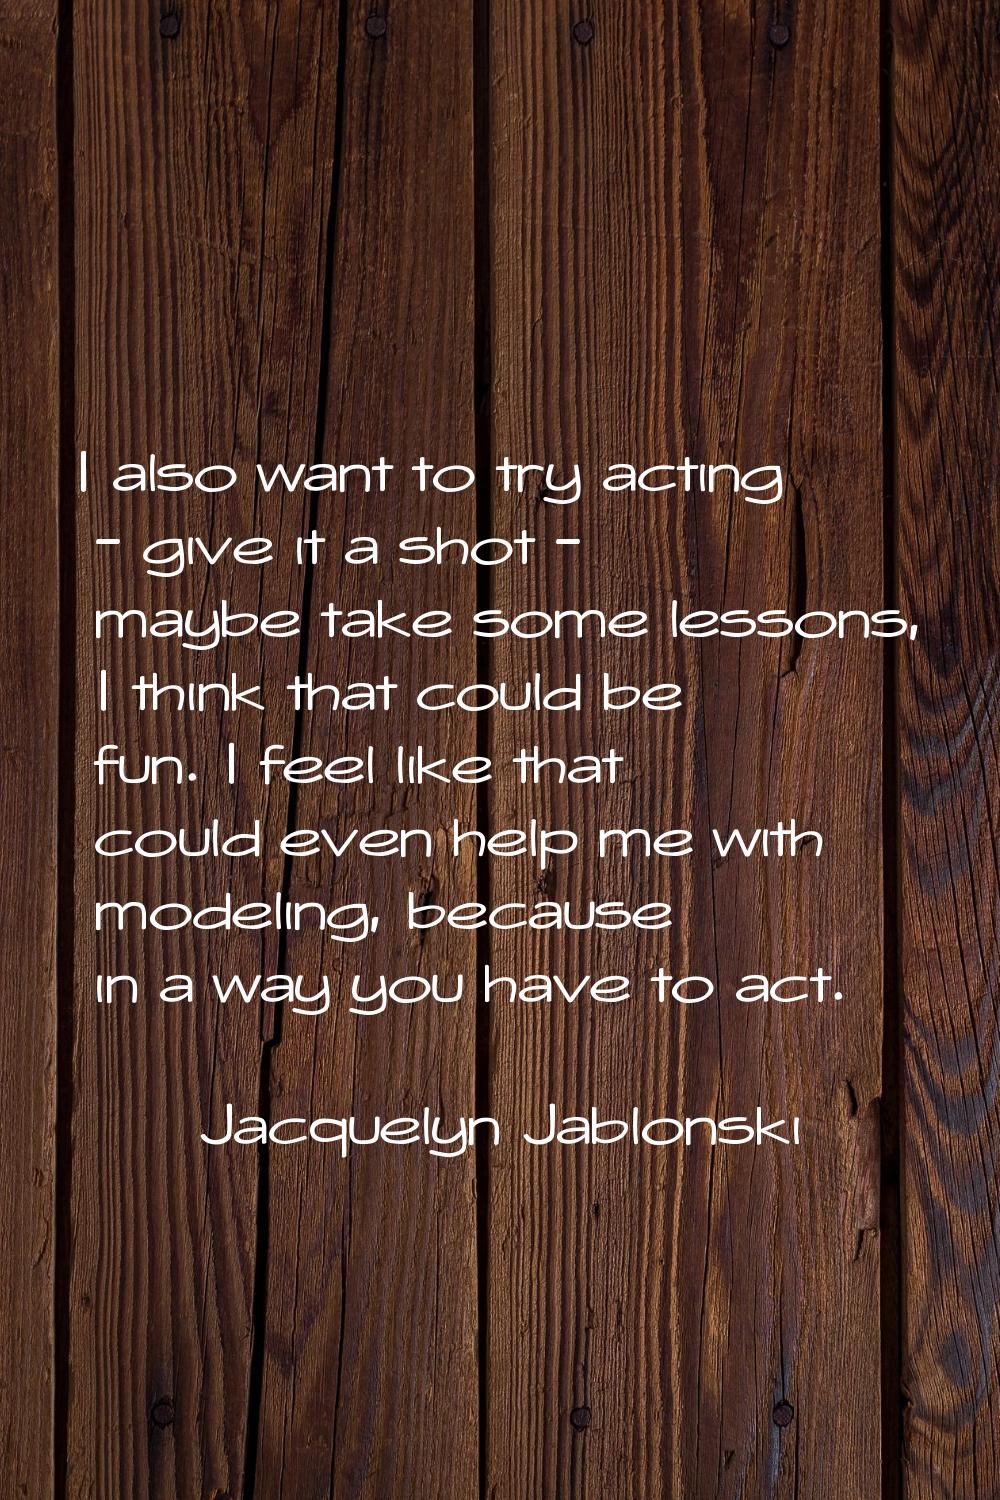 I also want to try acting - give it a shot - maybe take some lessons, I think that could be fun. I 